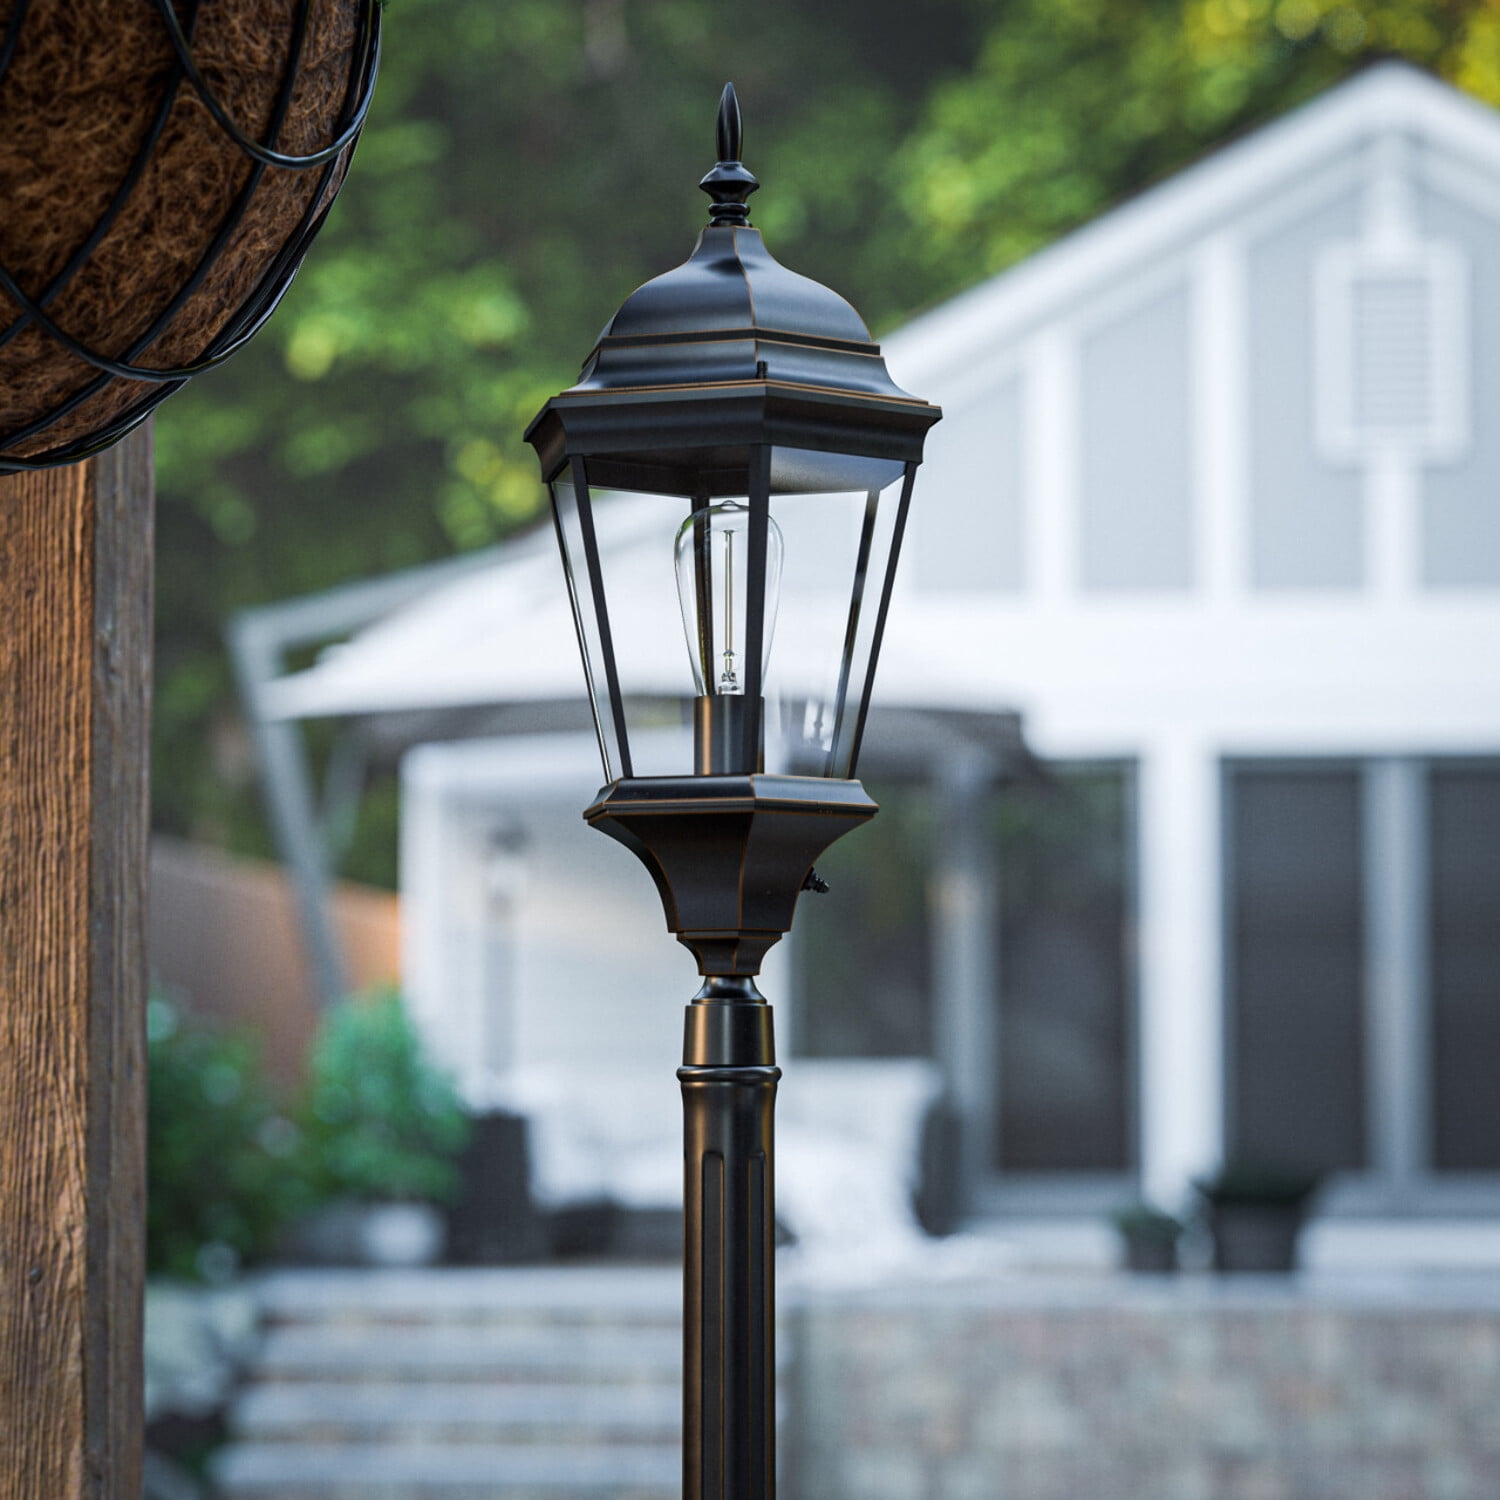 Lepro LED Lantern Review: Does it Hold Up? - Tested by Bob Vila